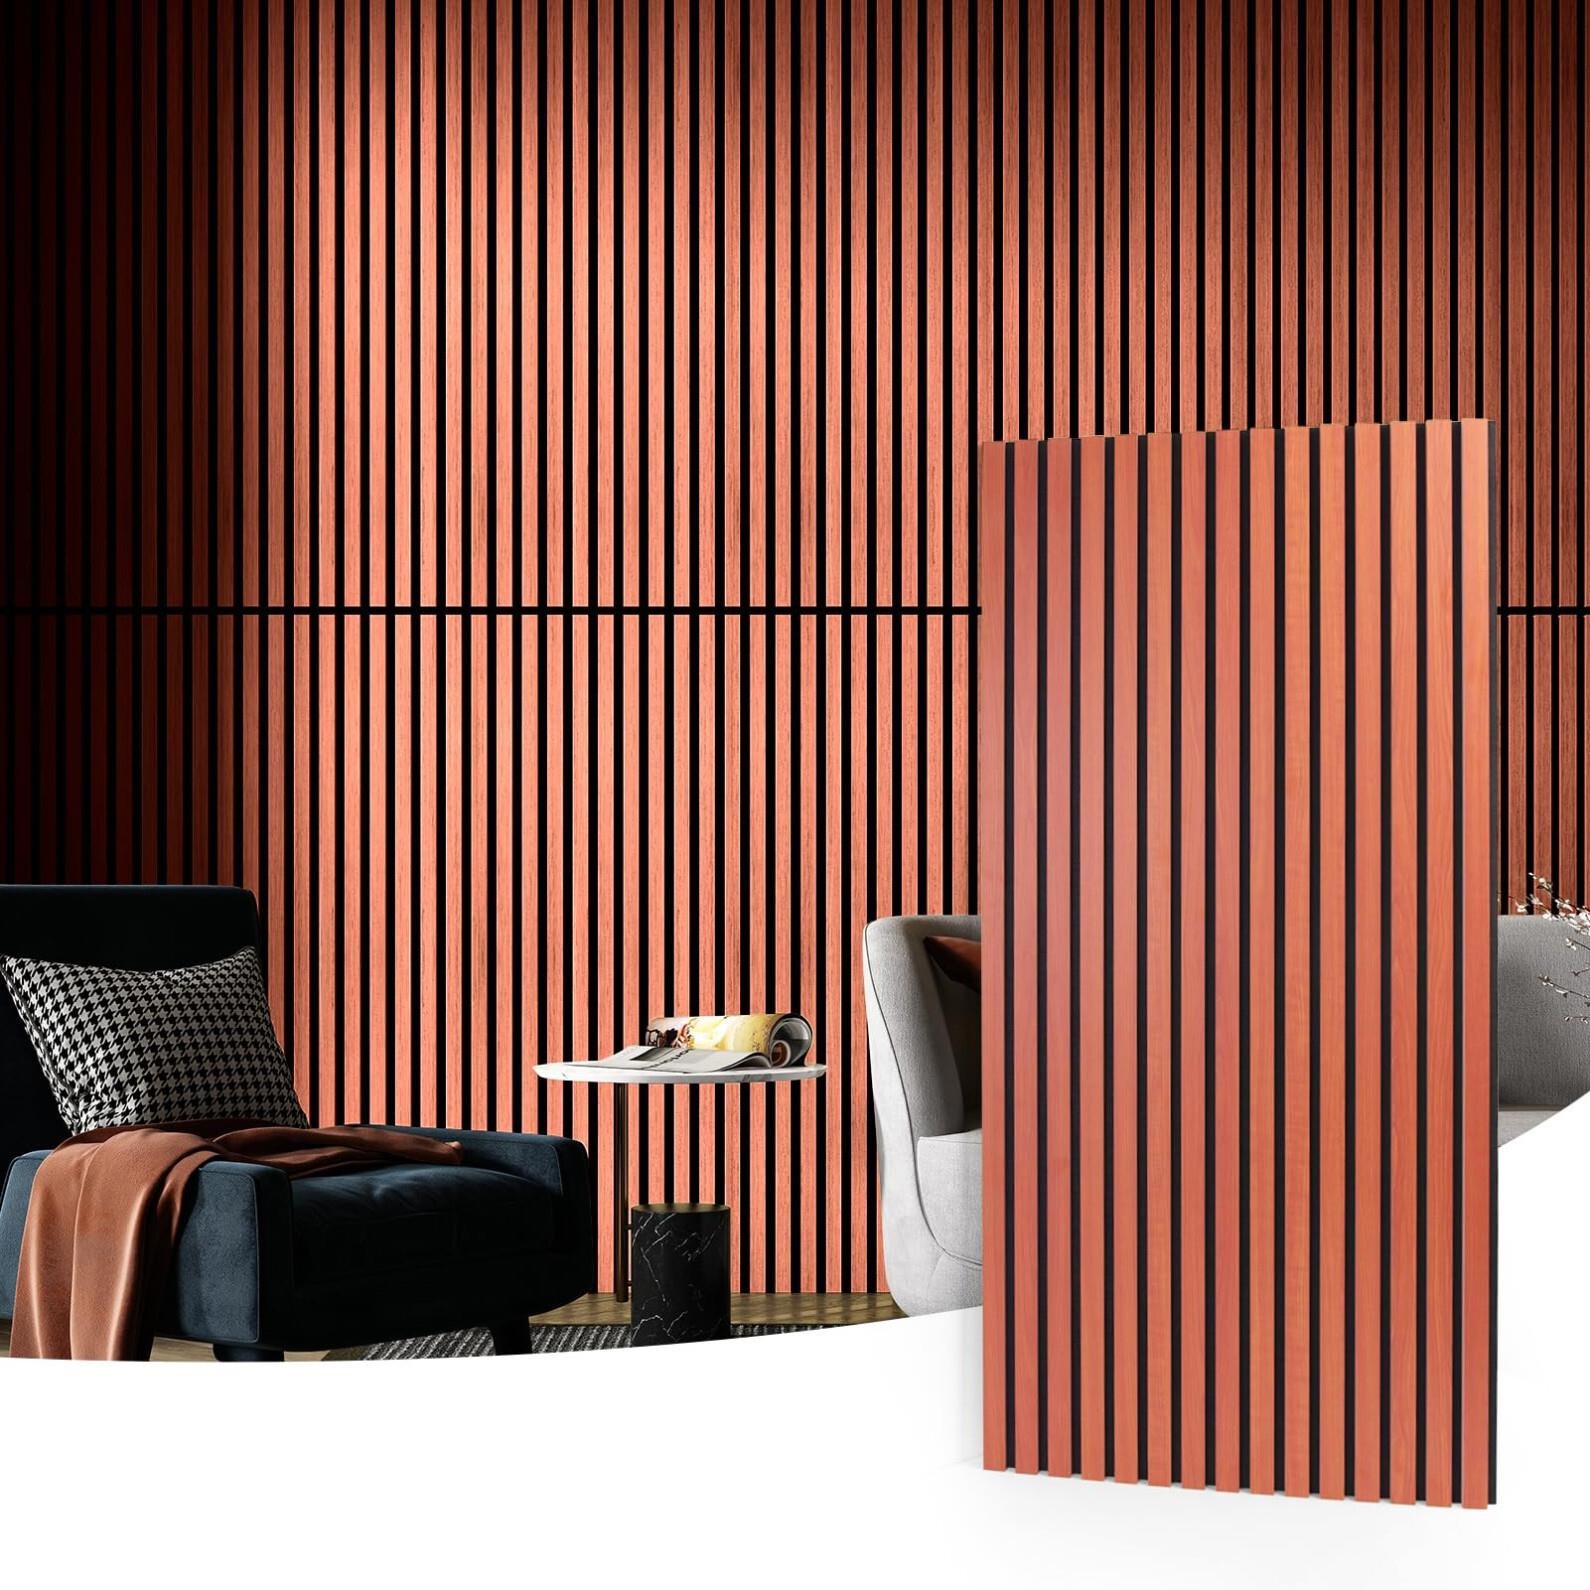 Art3d 2 Wood Slat Acoustic Panels for Wall and Cei